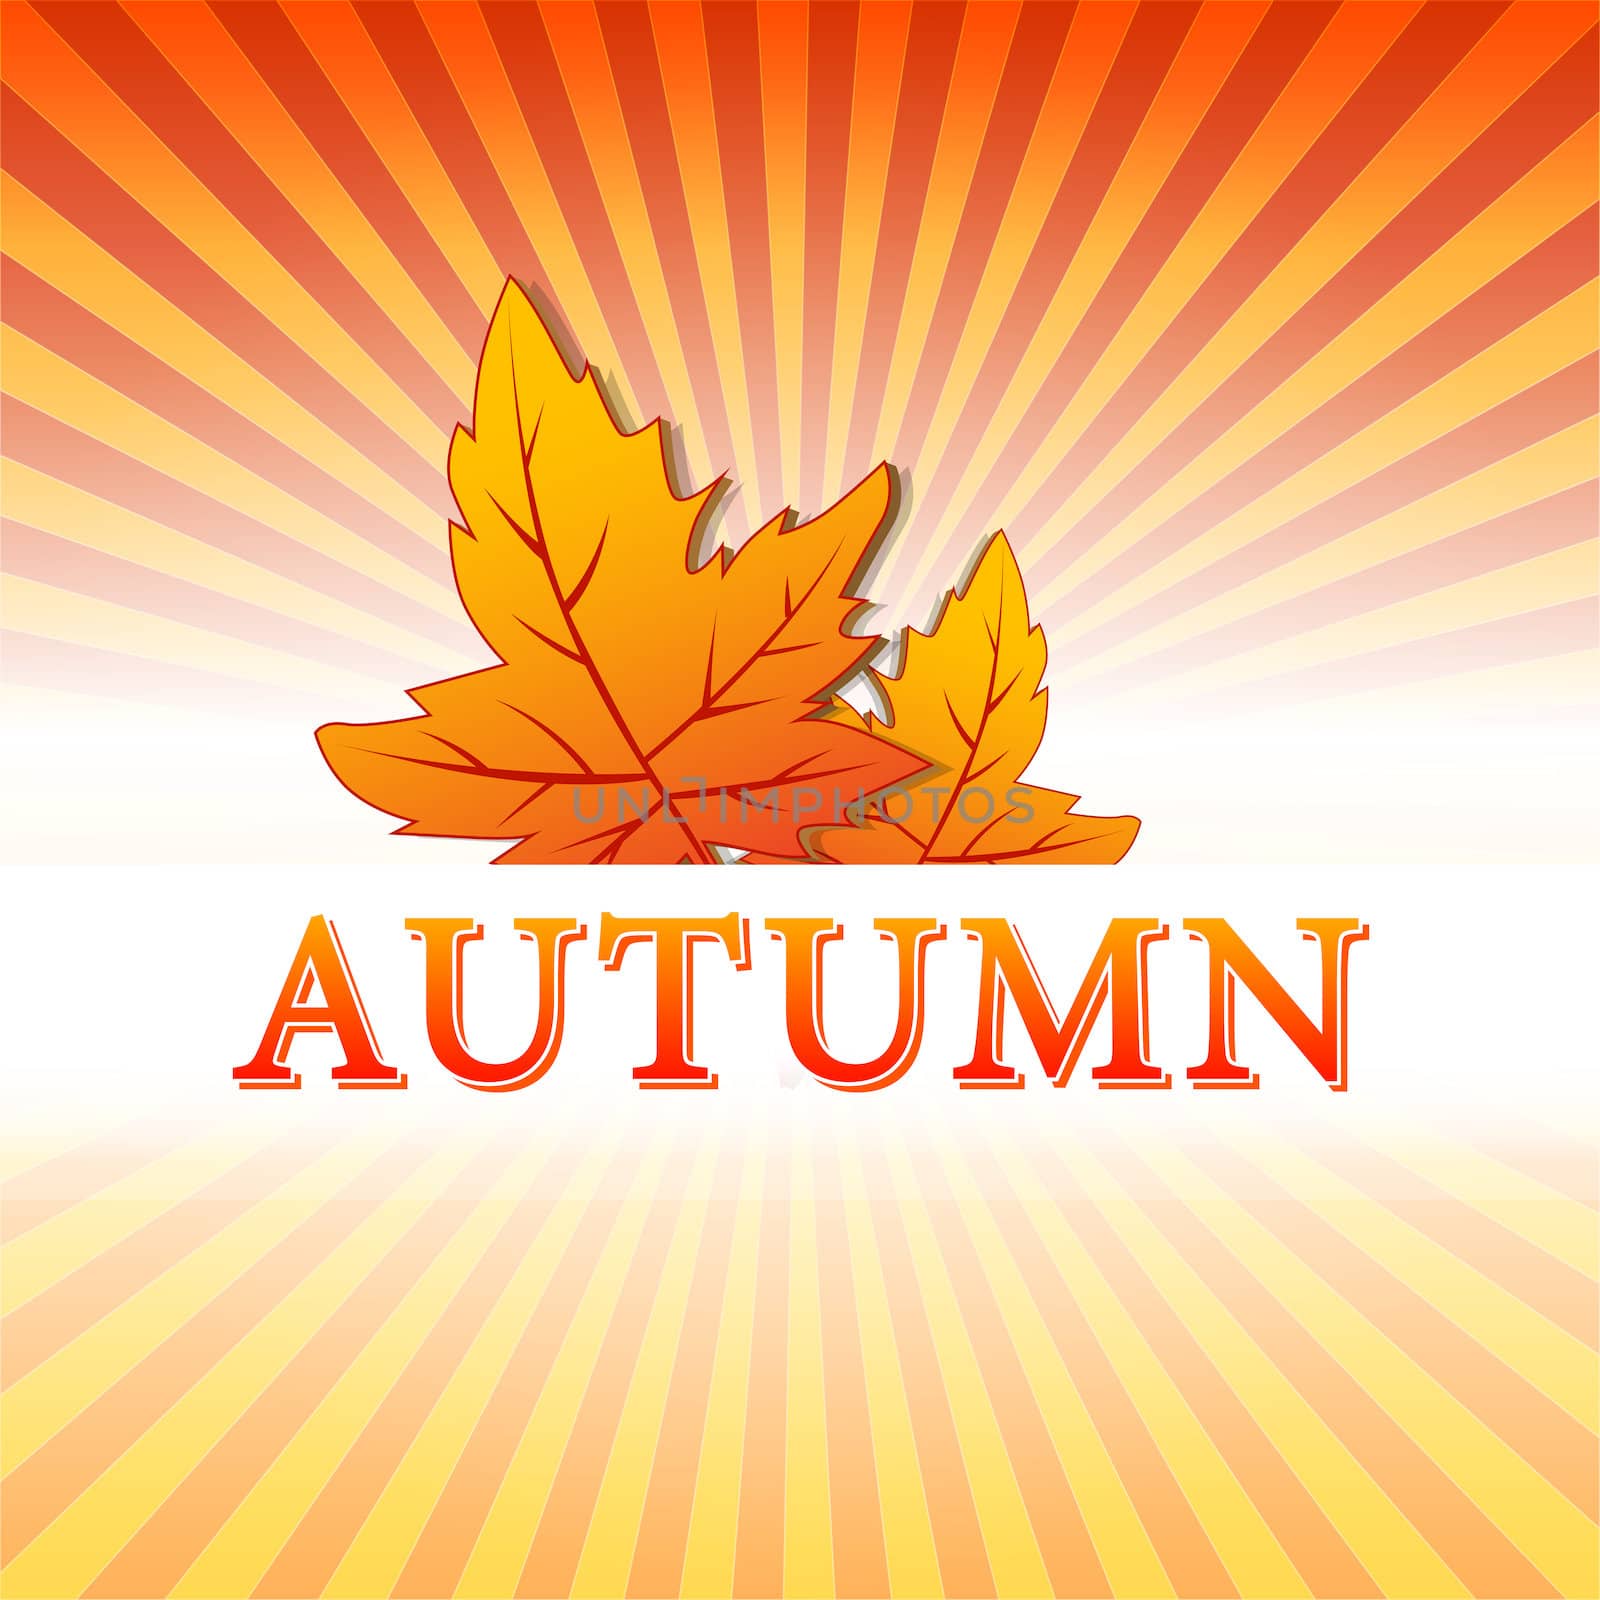 abstract illustration with text autumn and drawn fall leaves over yellow orange red gradient rays